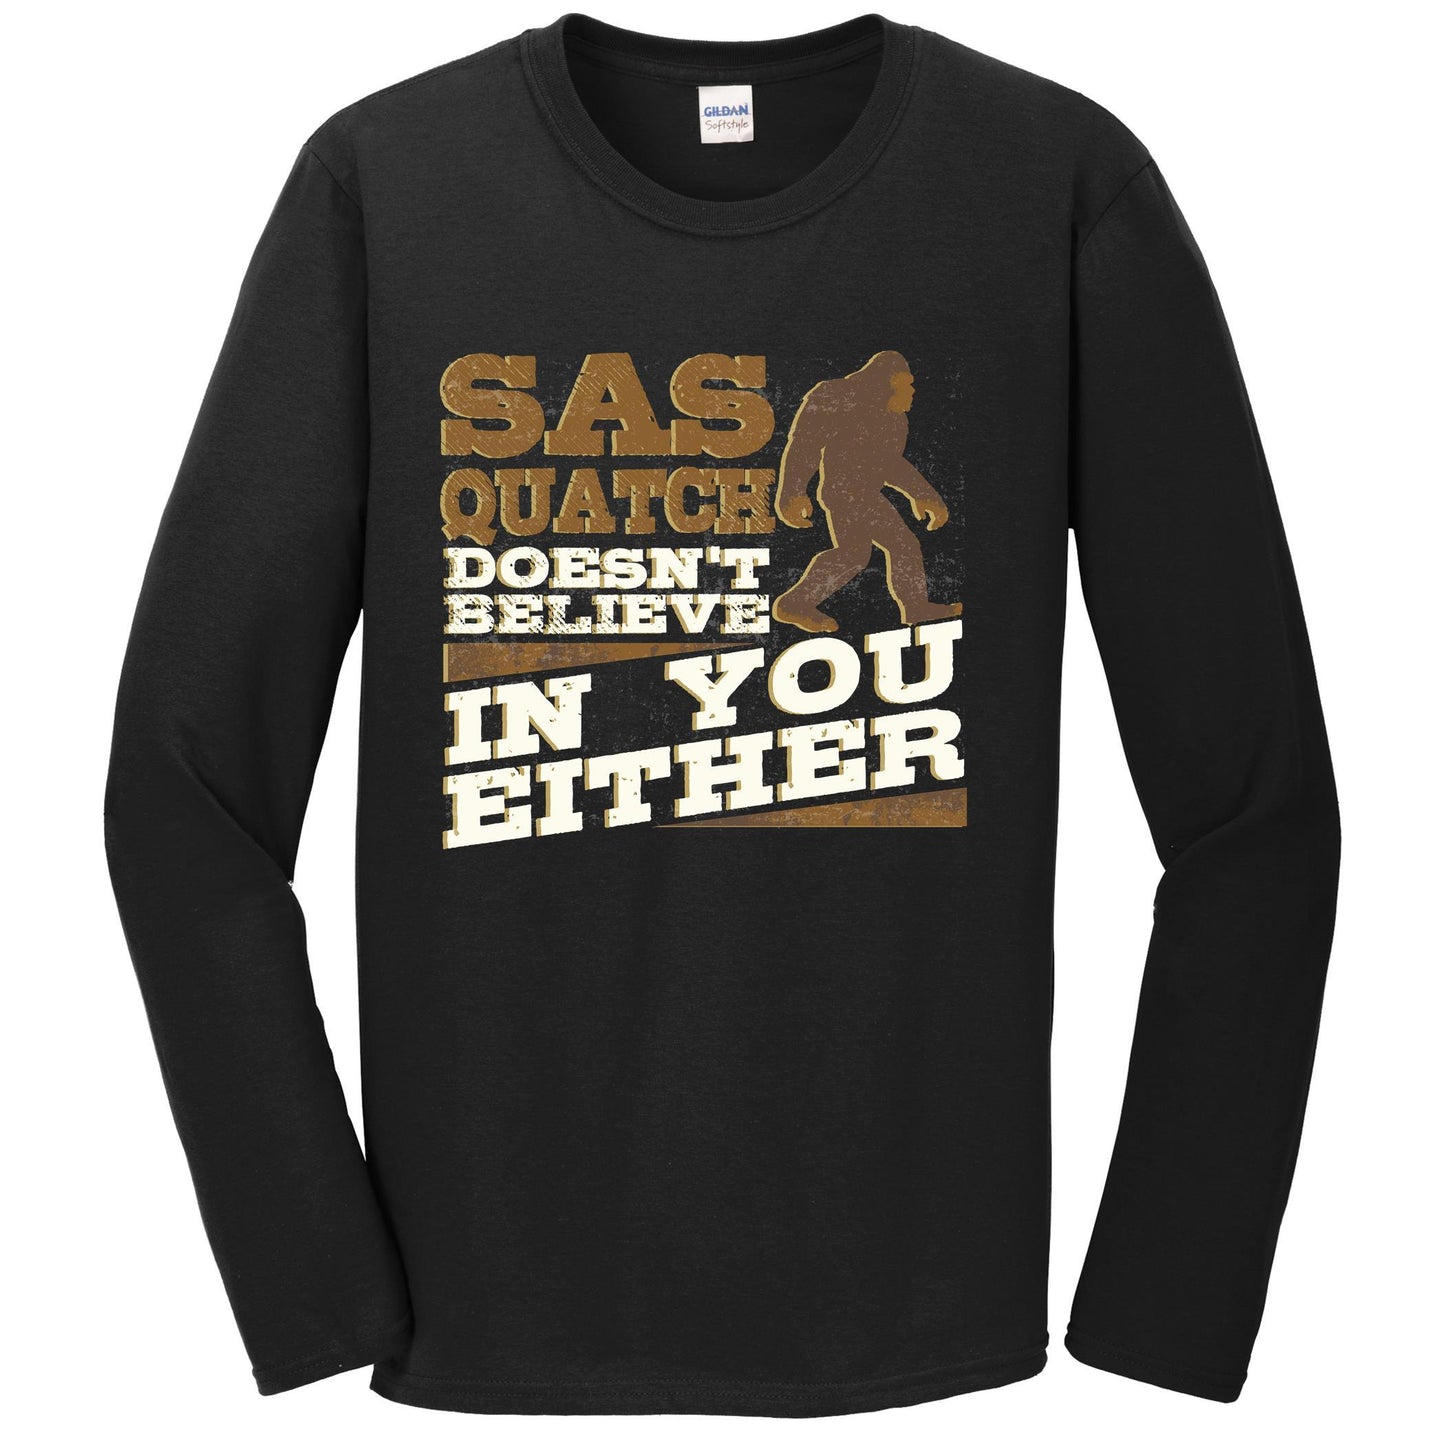 Sasquatch Doesn't Believe In You Either Funny Bigfoot Long Sleeve T-Shirt